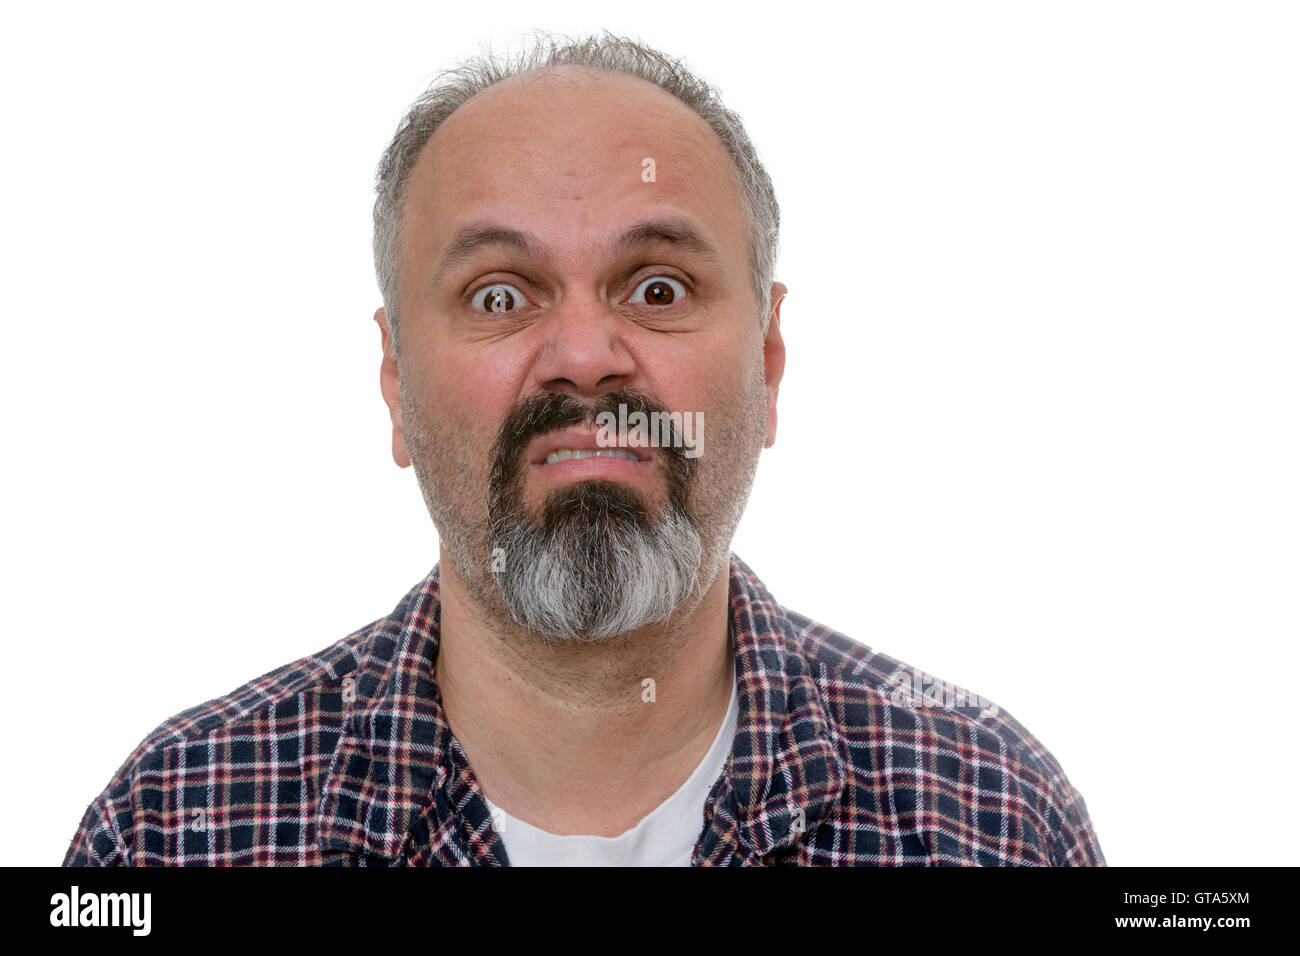 Middle-age man with a goatee with Monday morning blues standing in his pyjamas pulling a wide eyed disgruntled face of mock horr Stock Photo